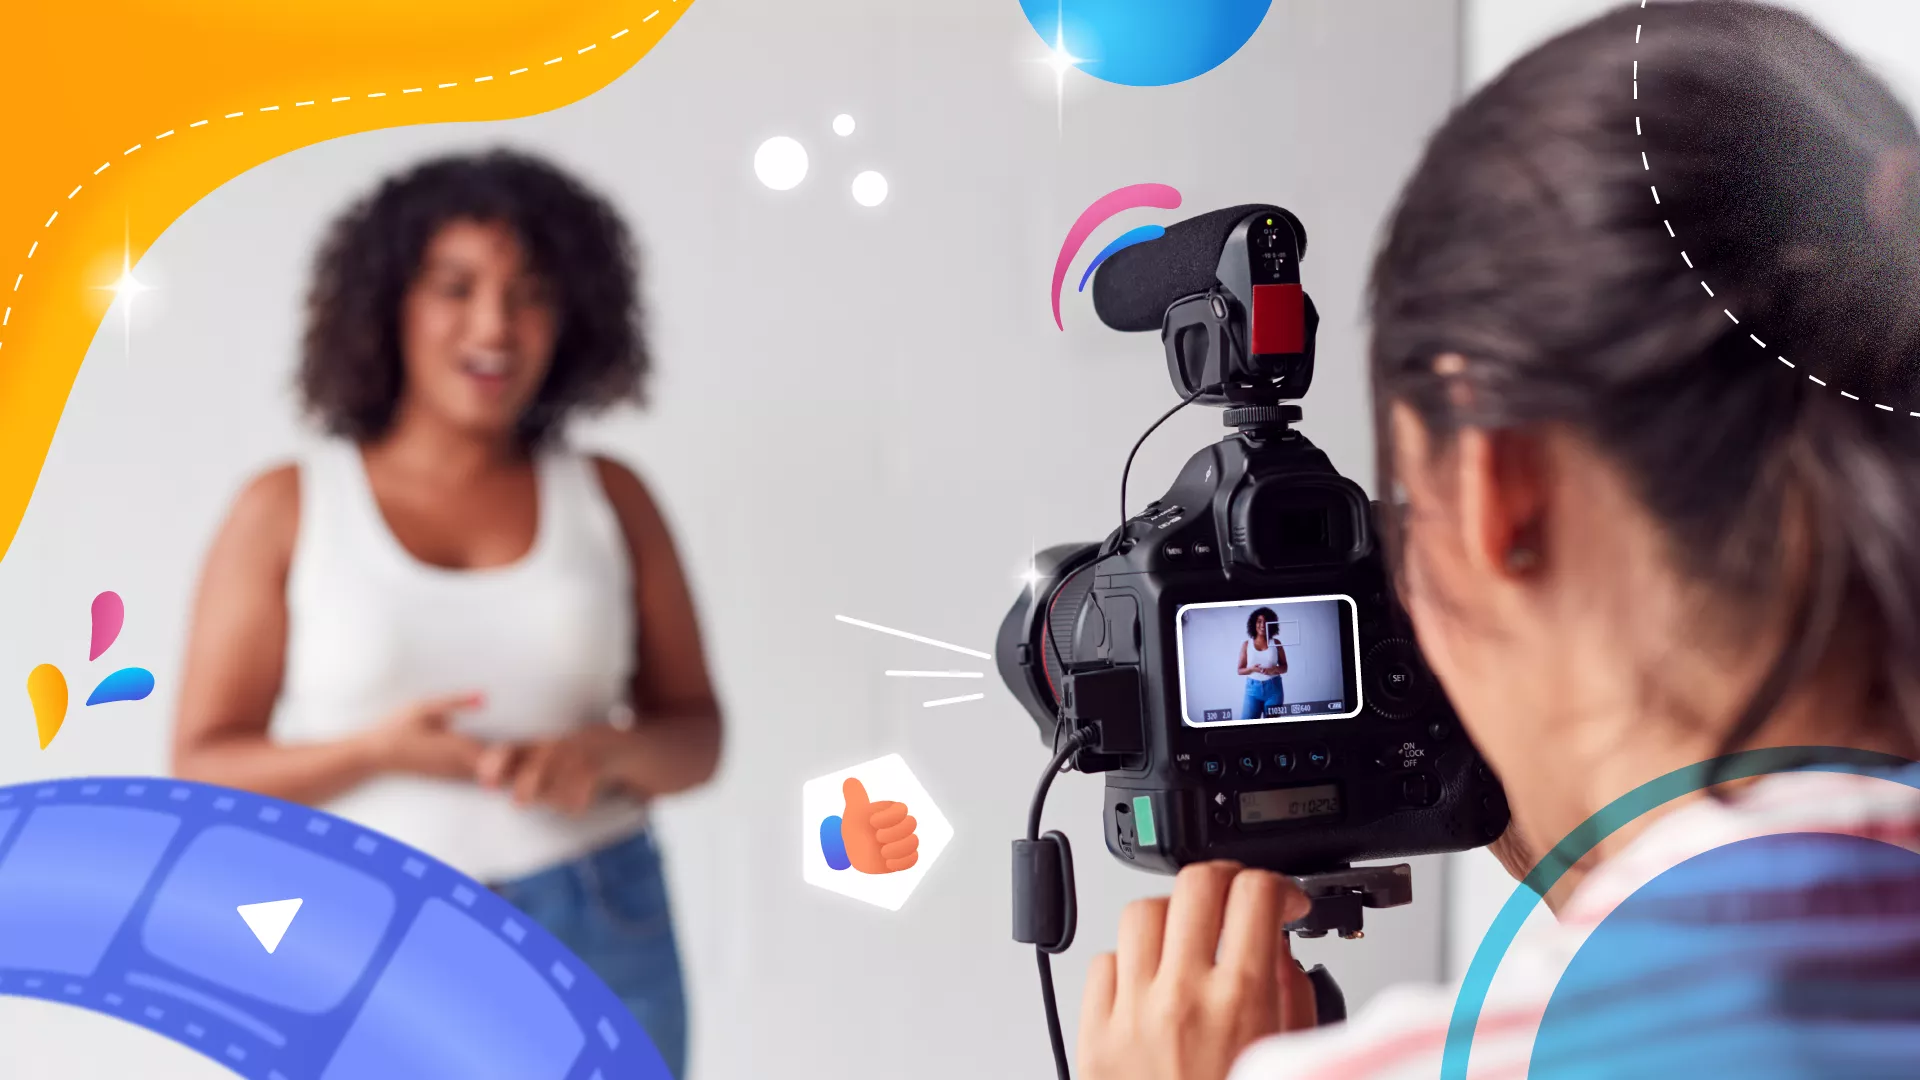 7 Reasons Why Marketers Should be Investing in Video Content